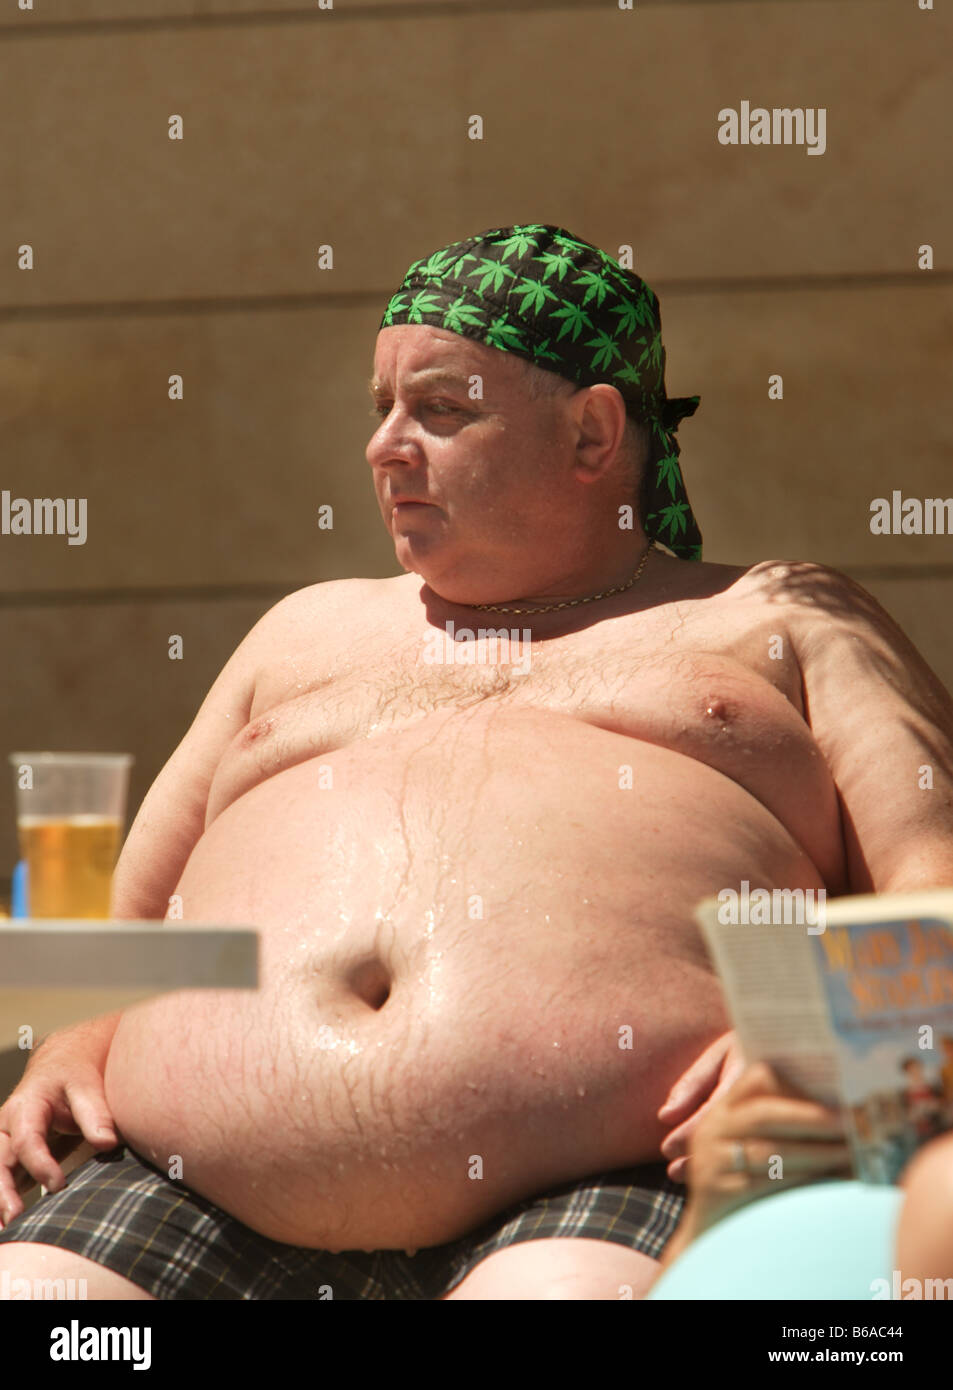 fat-man-with-huge-fat-belly-and-deep-belly-button-sweating-while-sitting-B6AC44.jpg